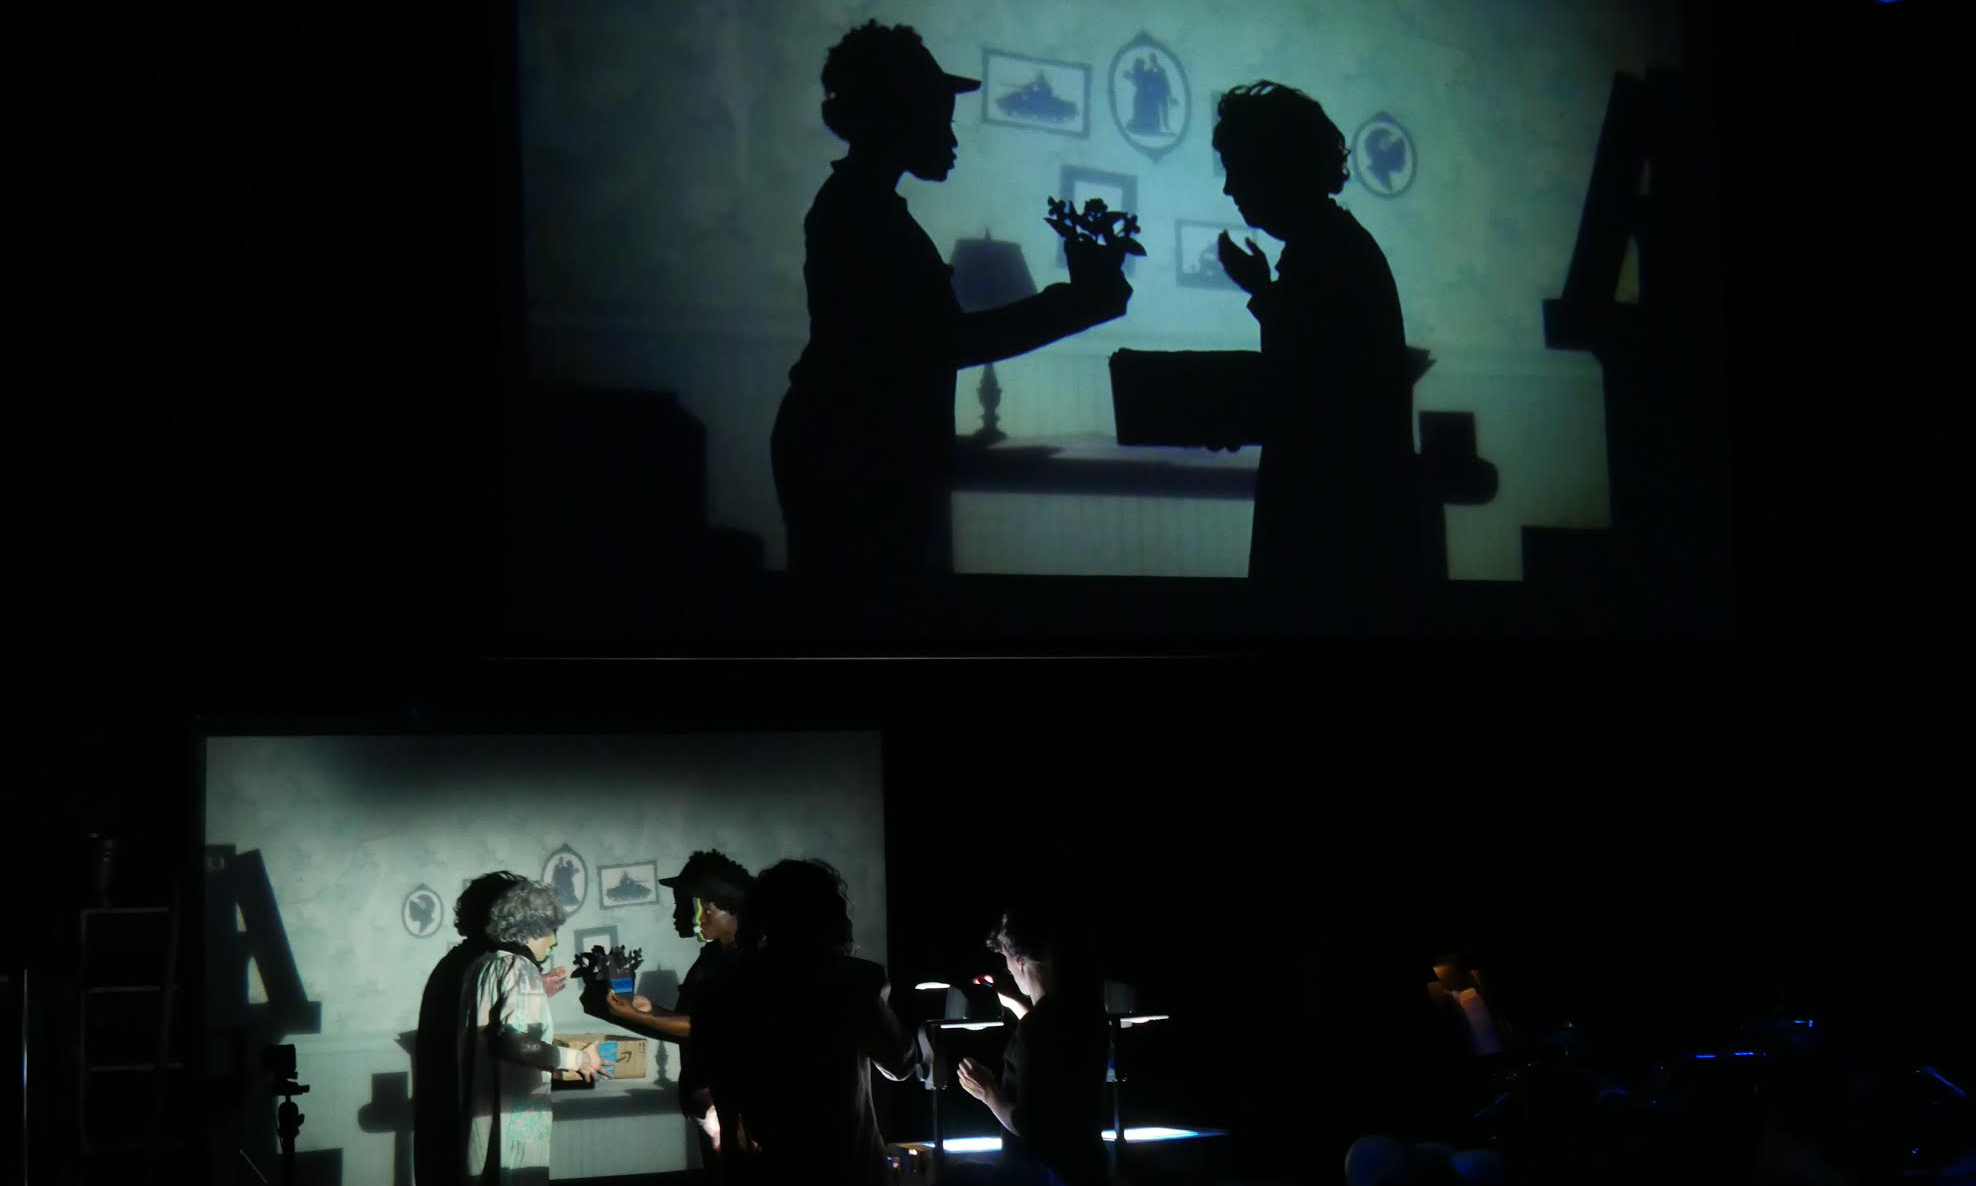 actors onstage with a large shadowed projection above